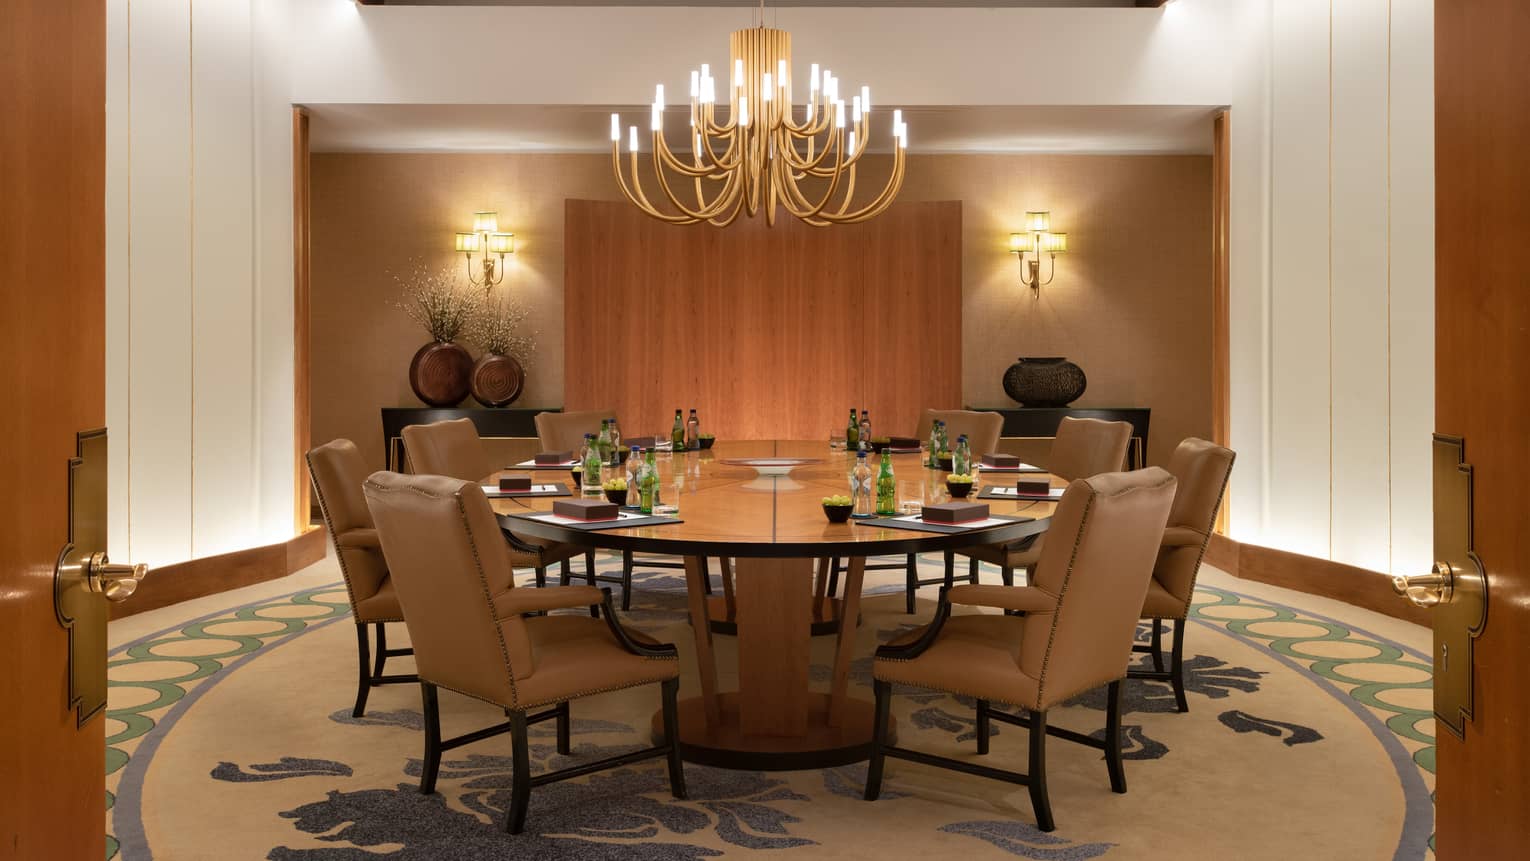 Boardroom with chandelier over circular wooden table and brown leather parsons chairs 